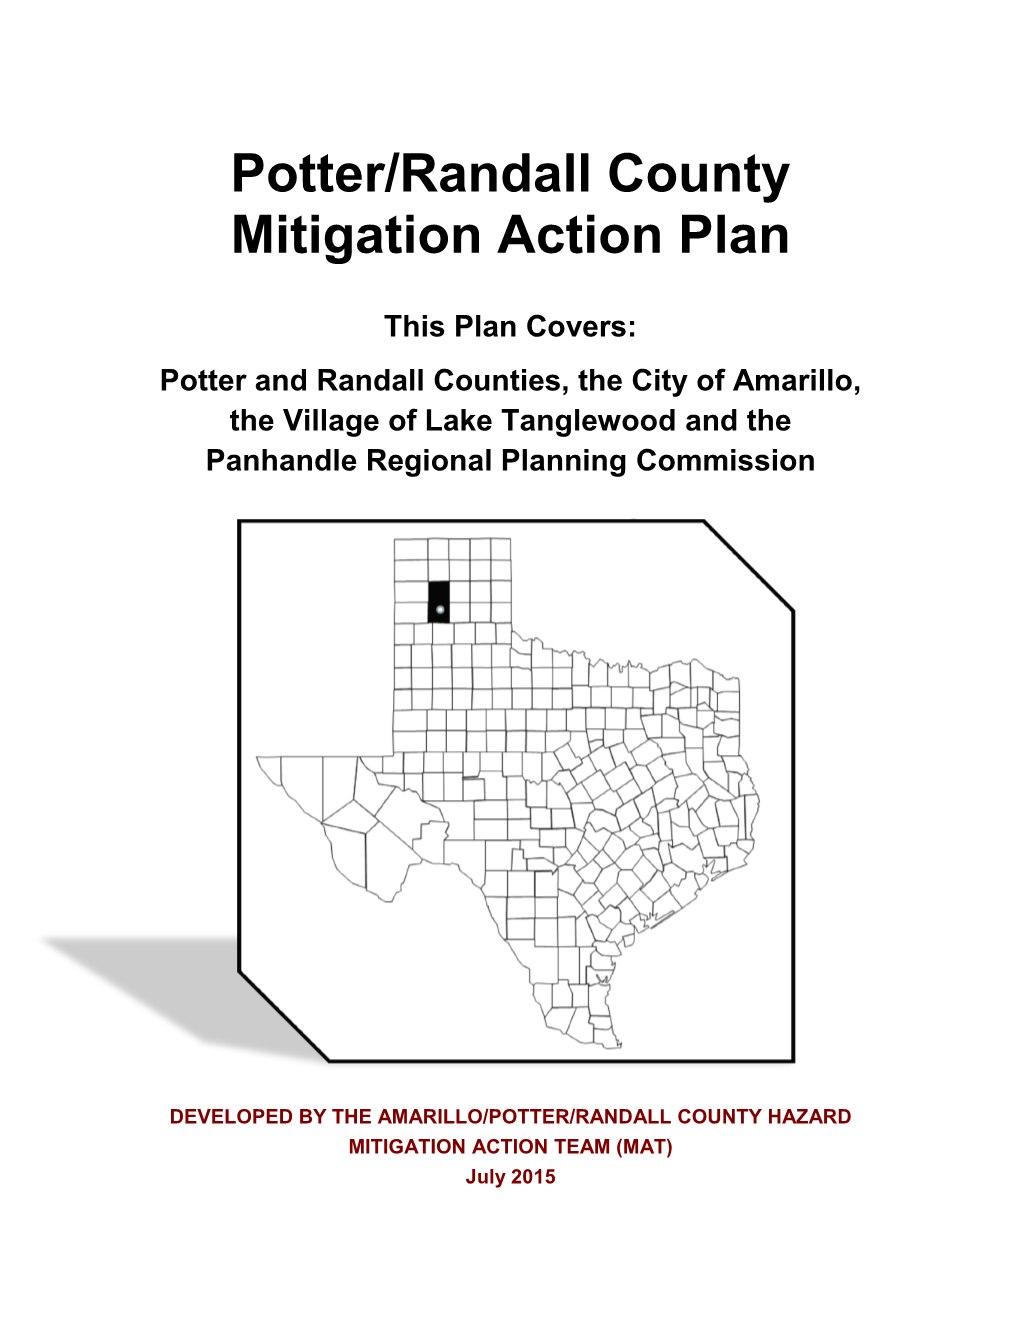 Potter/Randall County Mitigation Action Plan